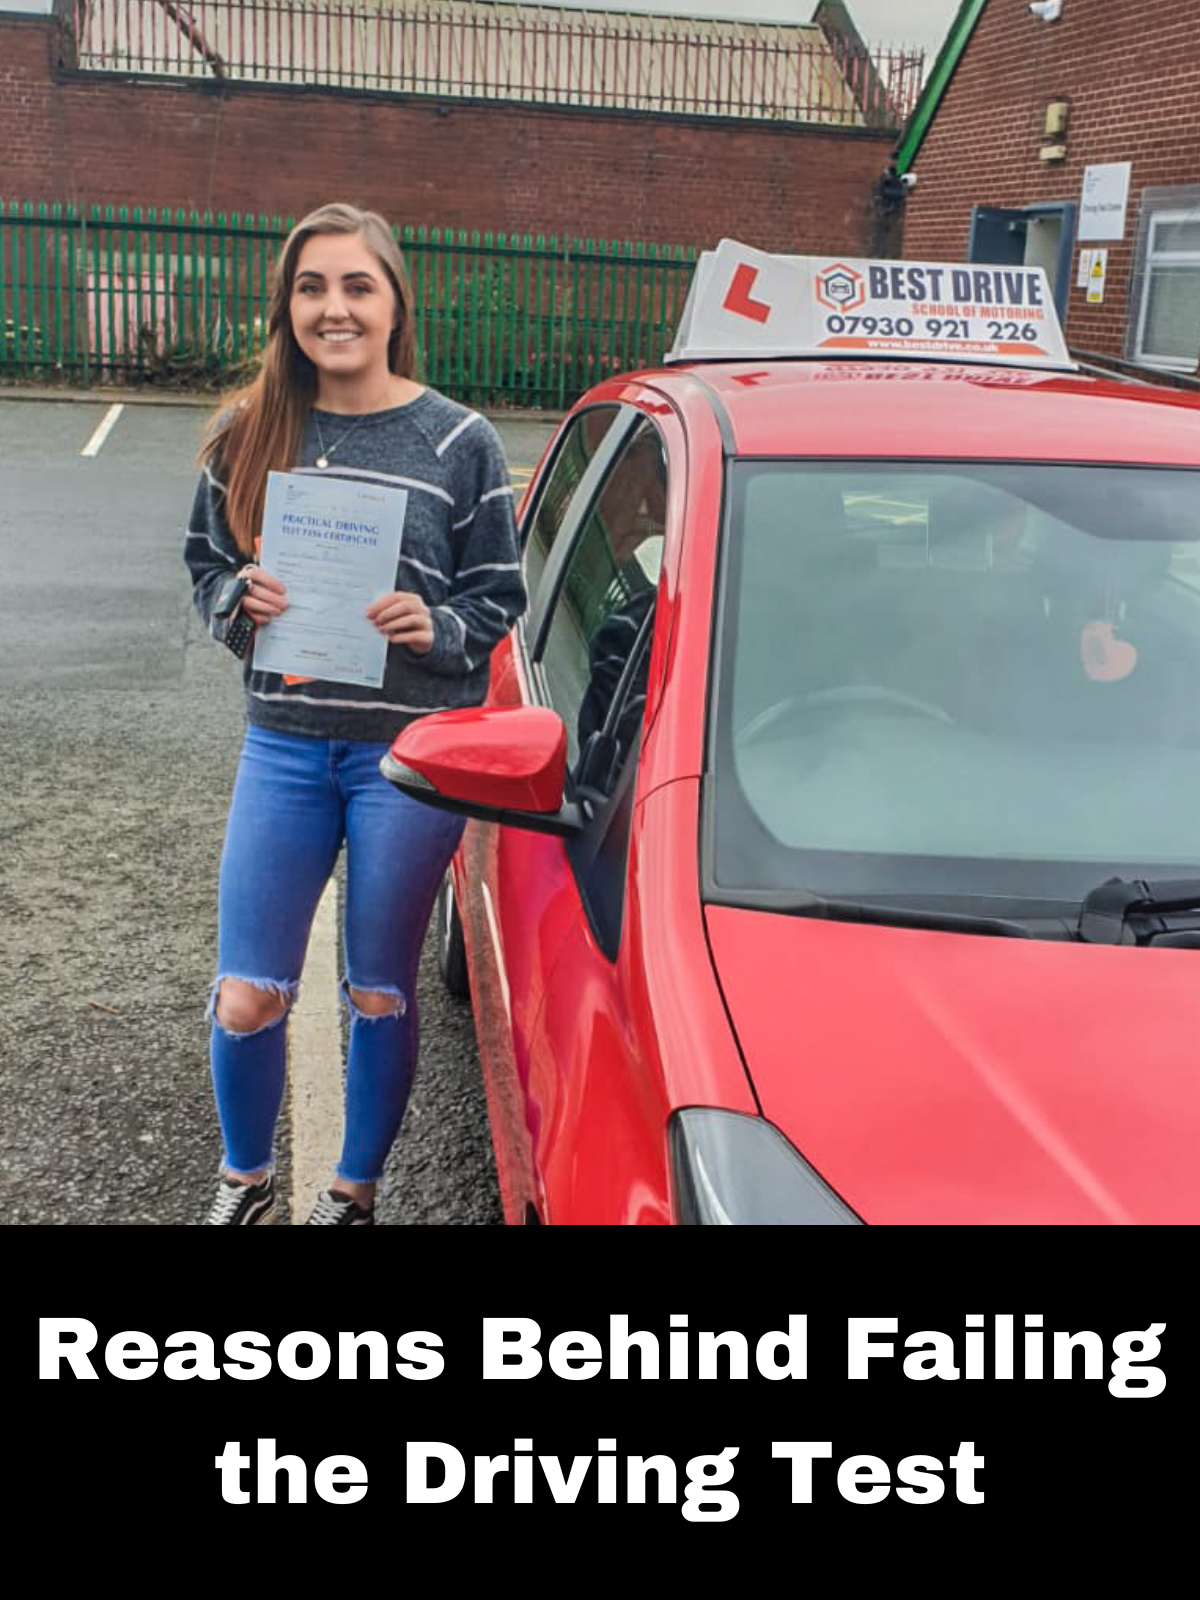 Reasons Behind Failing the Driving Test